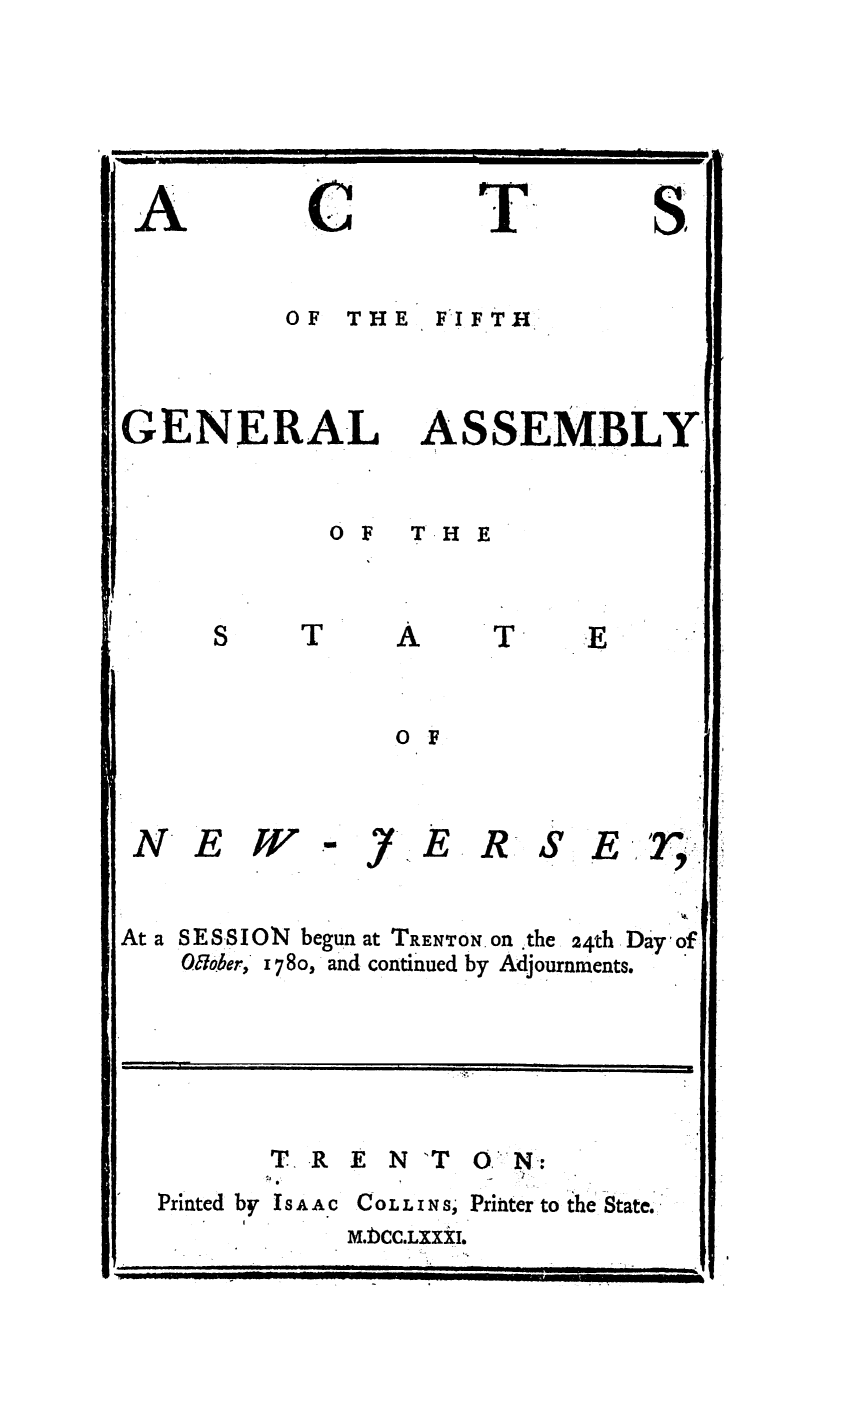 handle is hein.ssl/ssnj0231 and id is 1 raw text is: C

T

OF THE FIFTH

GENERAL

ASSEMBLY

OF  TH E

A

0F

NE W

.y.

E

R-S

Er

At a SESSION begun at TRENTON. On ,the 24th Day of
Oaober., 1 780, and continued by Adjournments.

T. R E N 'T 0 N:

Printed by IsAA C

Co L L I N s, Printer to the State.
M.bCC.LXXXIo

A

S

T

m*  *  I   .     . ..... ..                .    . .  . ... . ..  I II  l  Ill ]  I
__   ' 'L   . .. .....  I  B         .. . .      [    I  I  i  IIIII  HI      Illl .

i
i    1                                                          i                                                                                        i
,.: ,

'                --  ::   :: ....  i  : -    :!    .. .. ... . ..  ...   .
j__  ILq  1.111  IL_   _     -   L  _  L  ._   -II  lift  ......


